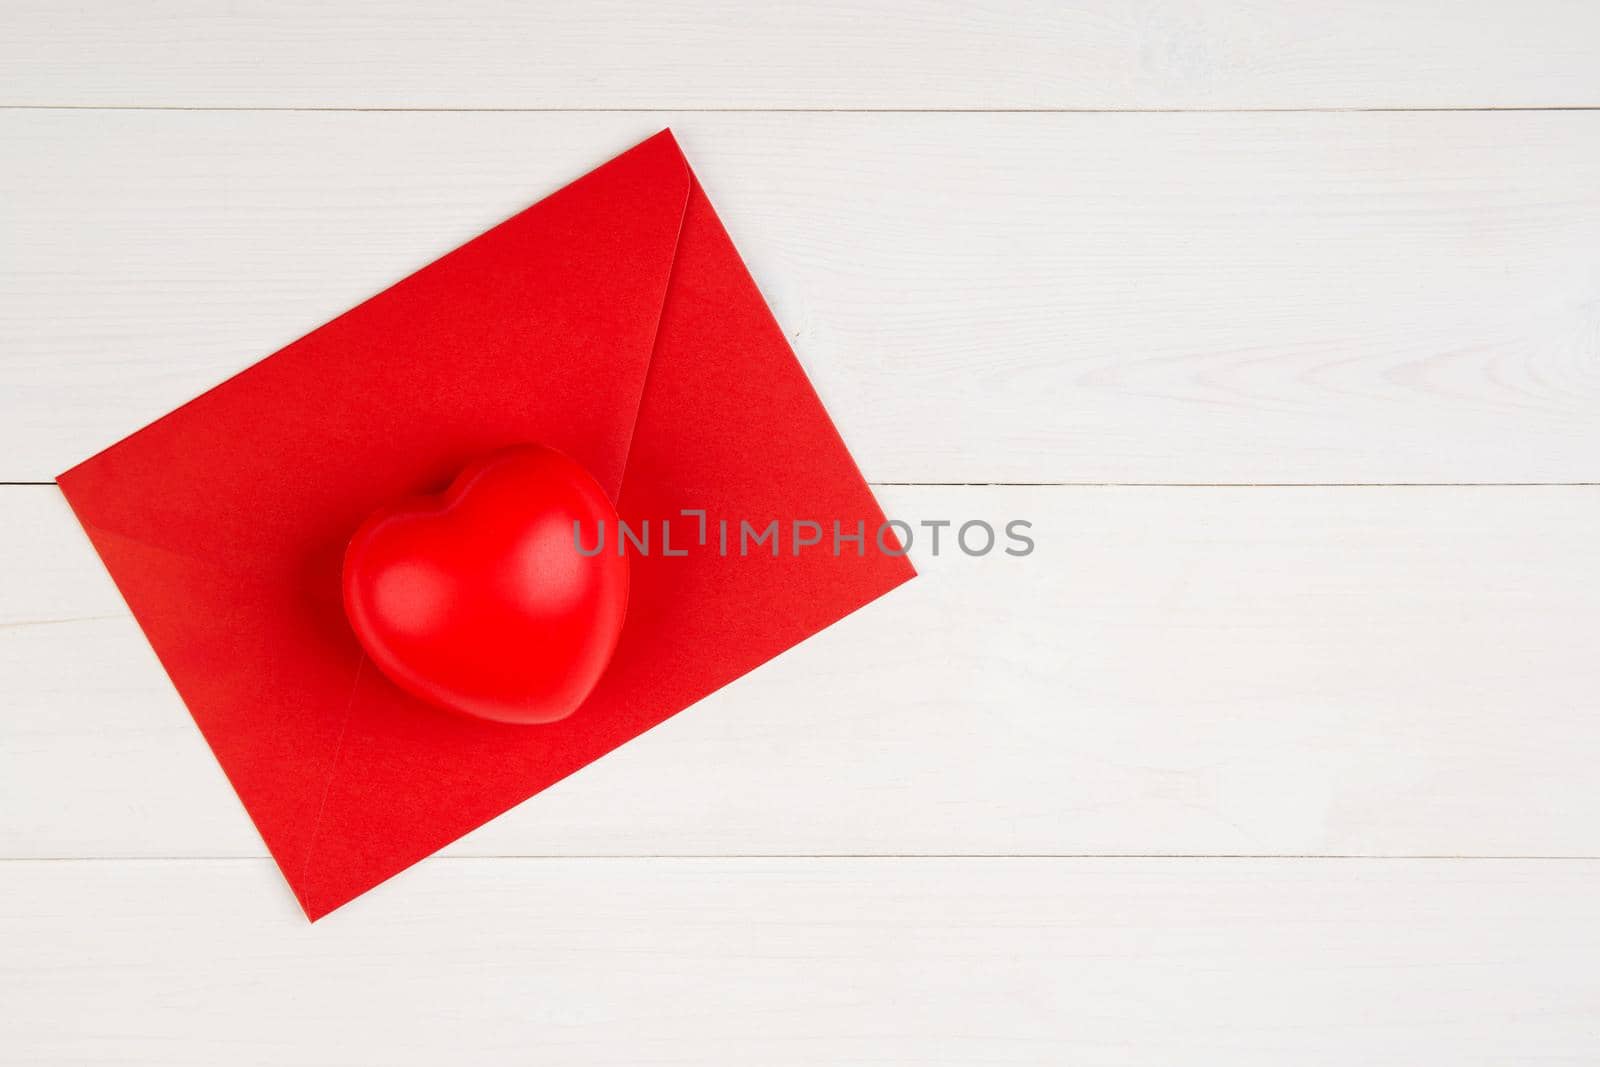 Valentine day with heart shape on red envelope on wooden desk, postcard or greeting card for congratulating, message and celebration, love and romance, top view, flat lay, holiday concept. by nnudoo